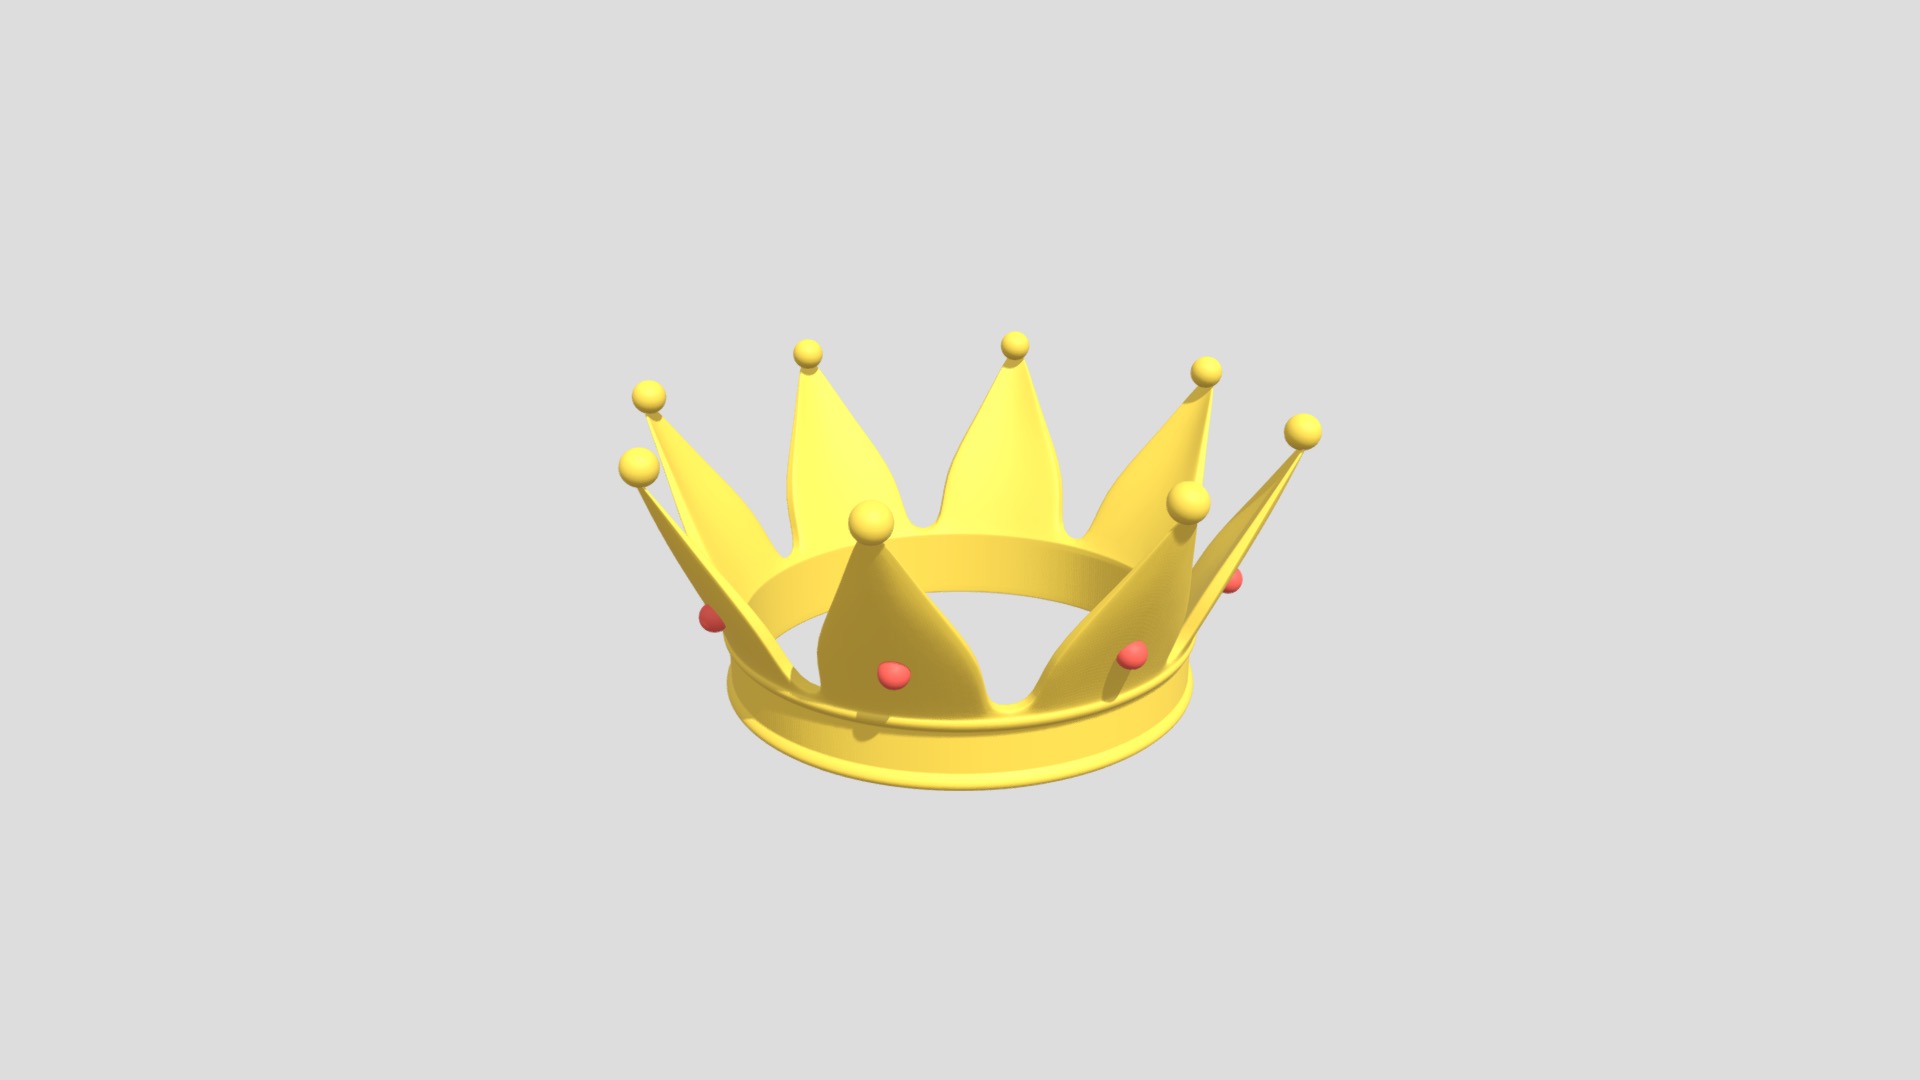 3D model Crown - This is a 3D model of the Crown. The 3D model is about a yellow crown with red and white balls on it.